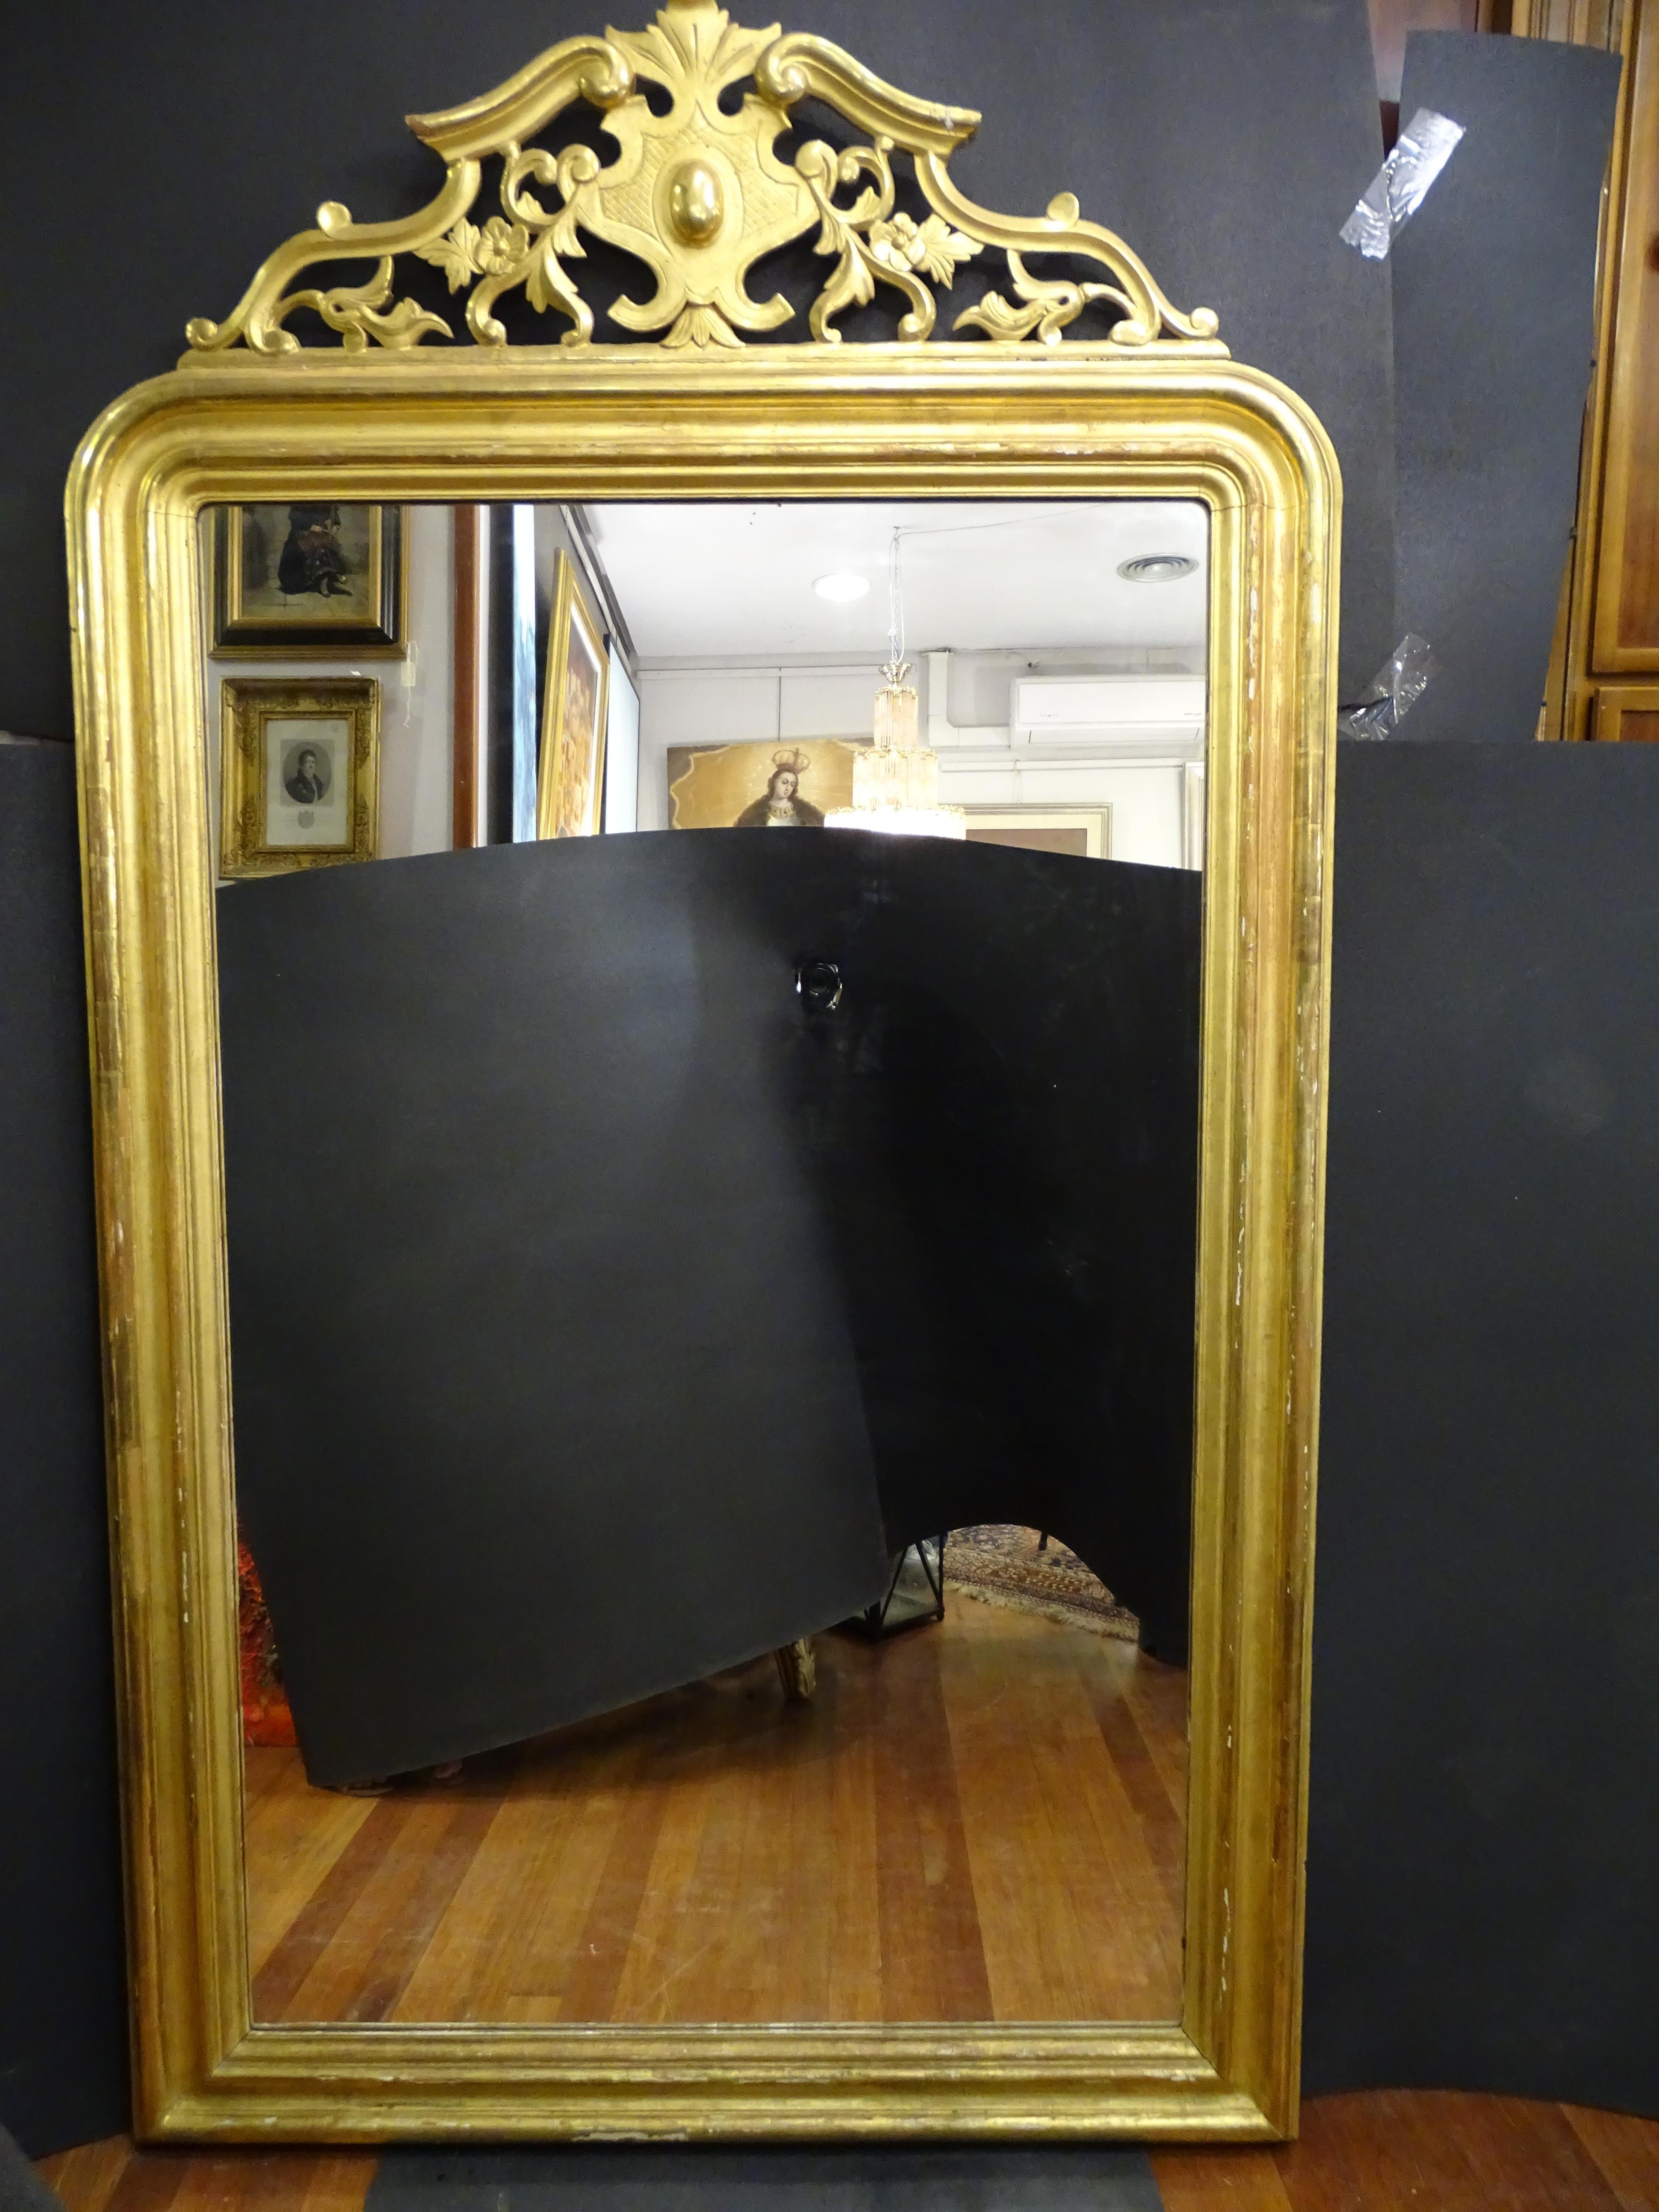 Outstanding wall mirror or Trumeau mirror in carved and gilded wood with 24 cts gold burnished with agate stone.
In a good condition with age and use.
Its an amazing mirror very sough after in the antique  antique market, it,s an amazing piece of